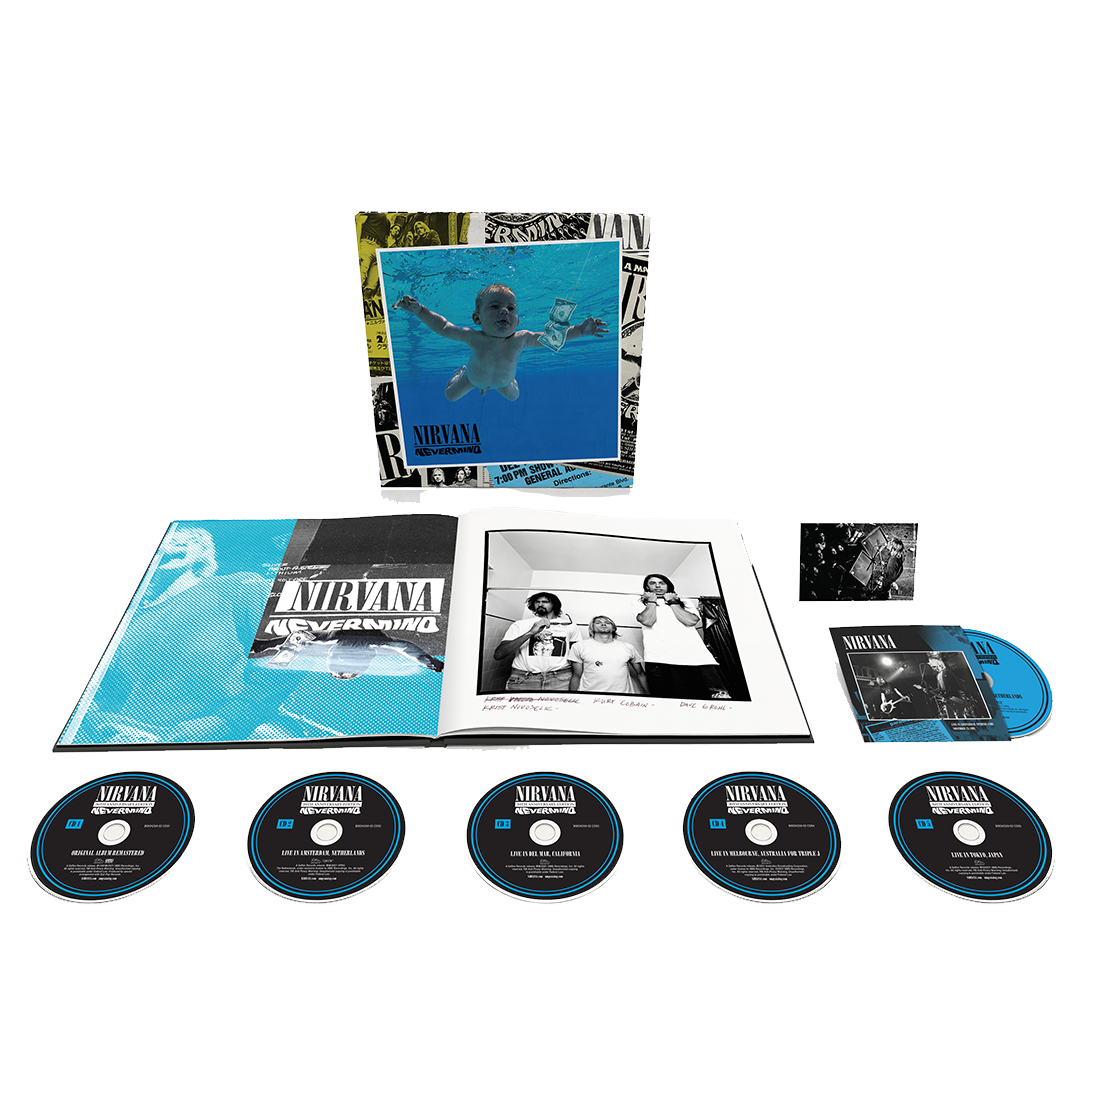 Nirvana - Nevermind (30th Anniversary): Super Deluxe Edition 5CD + Blu-Ray Box Set